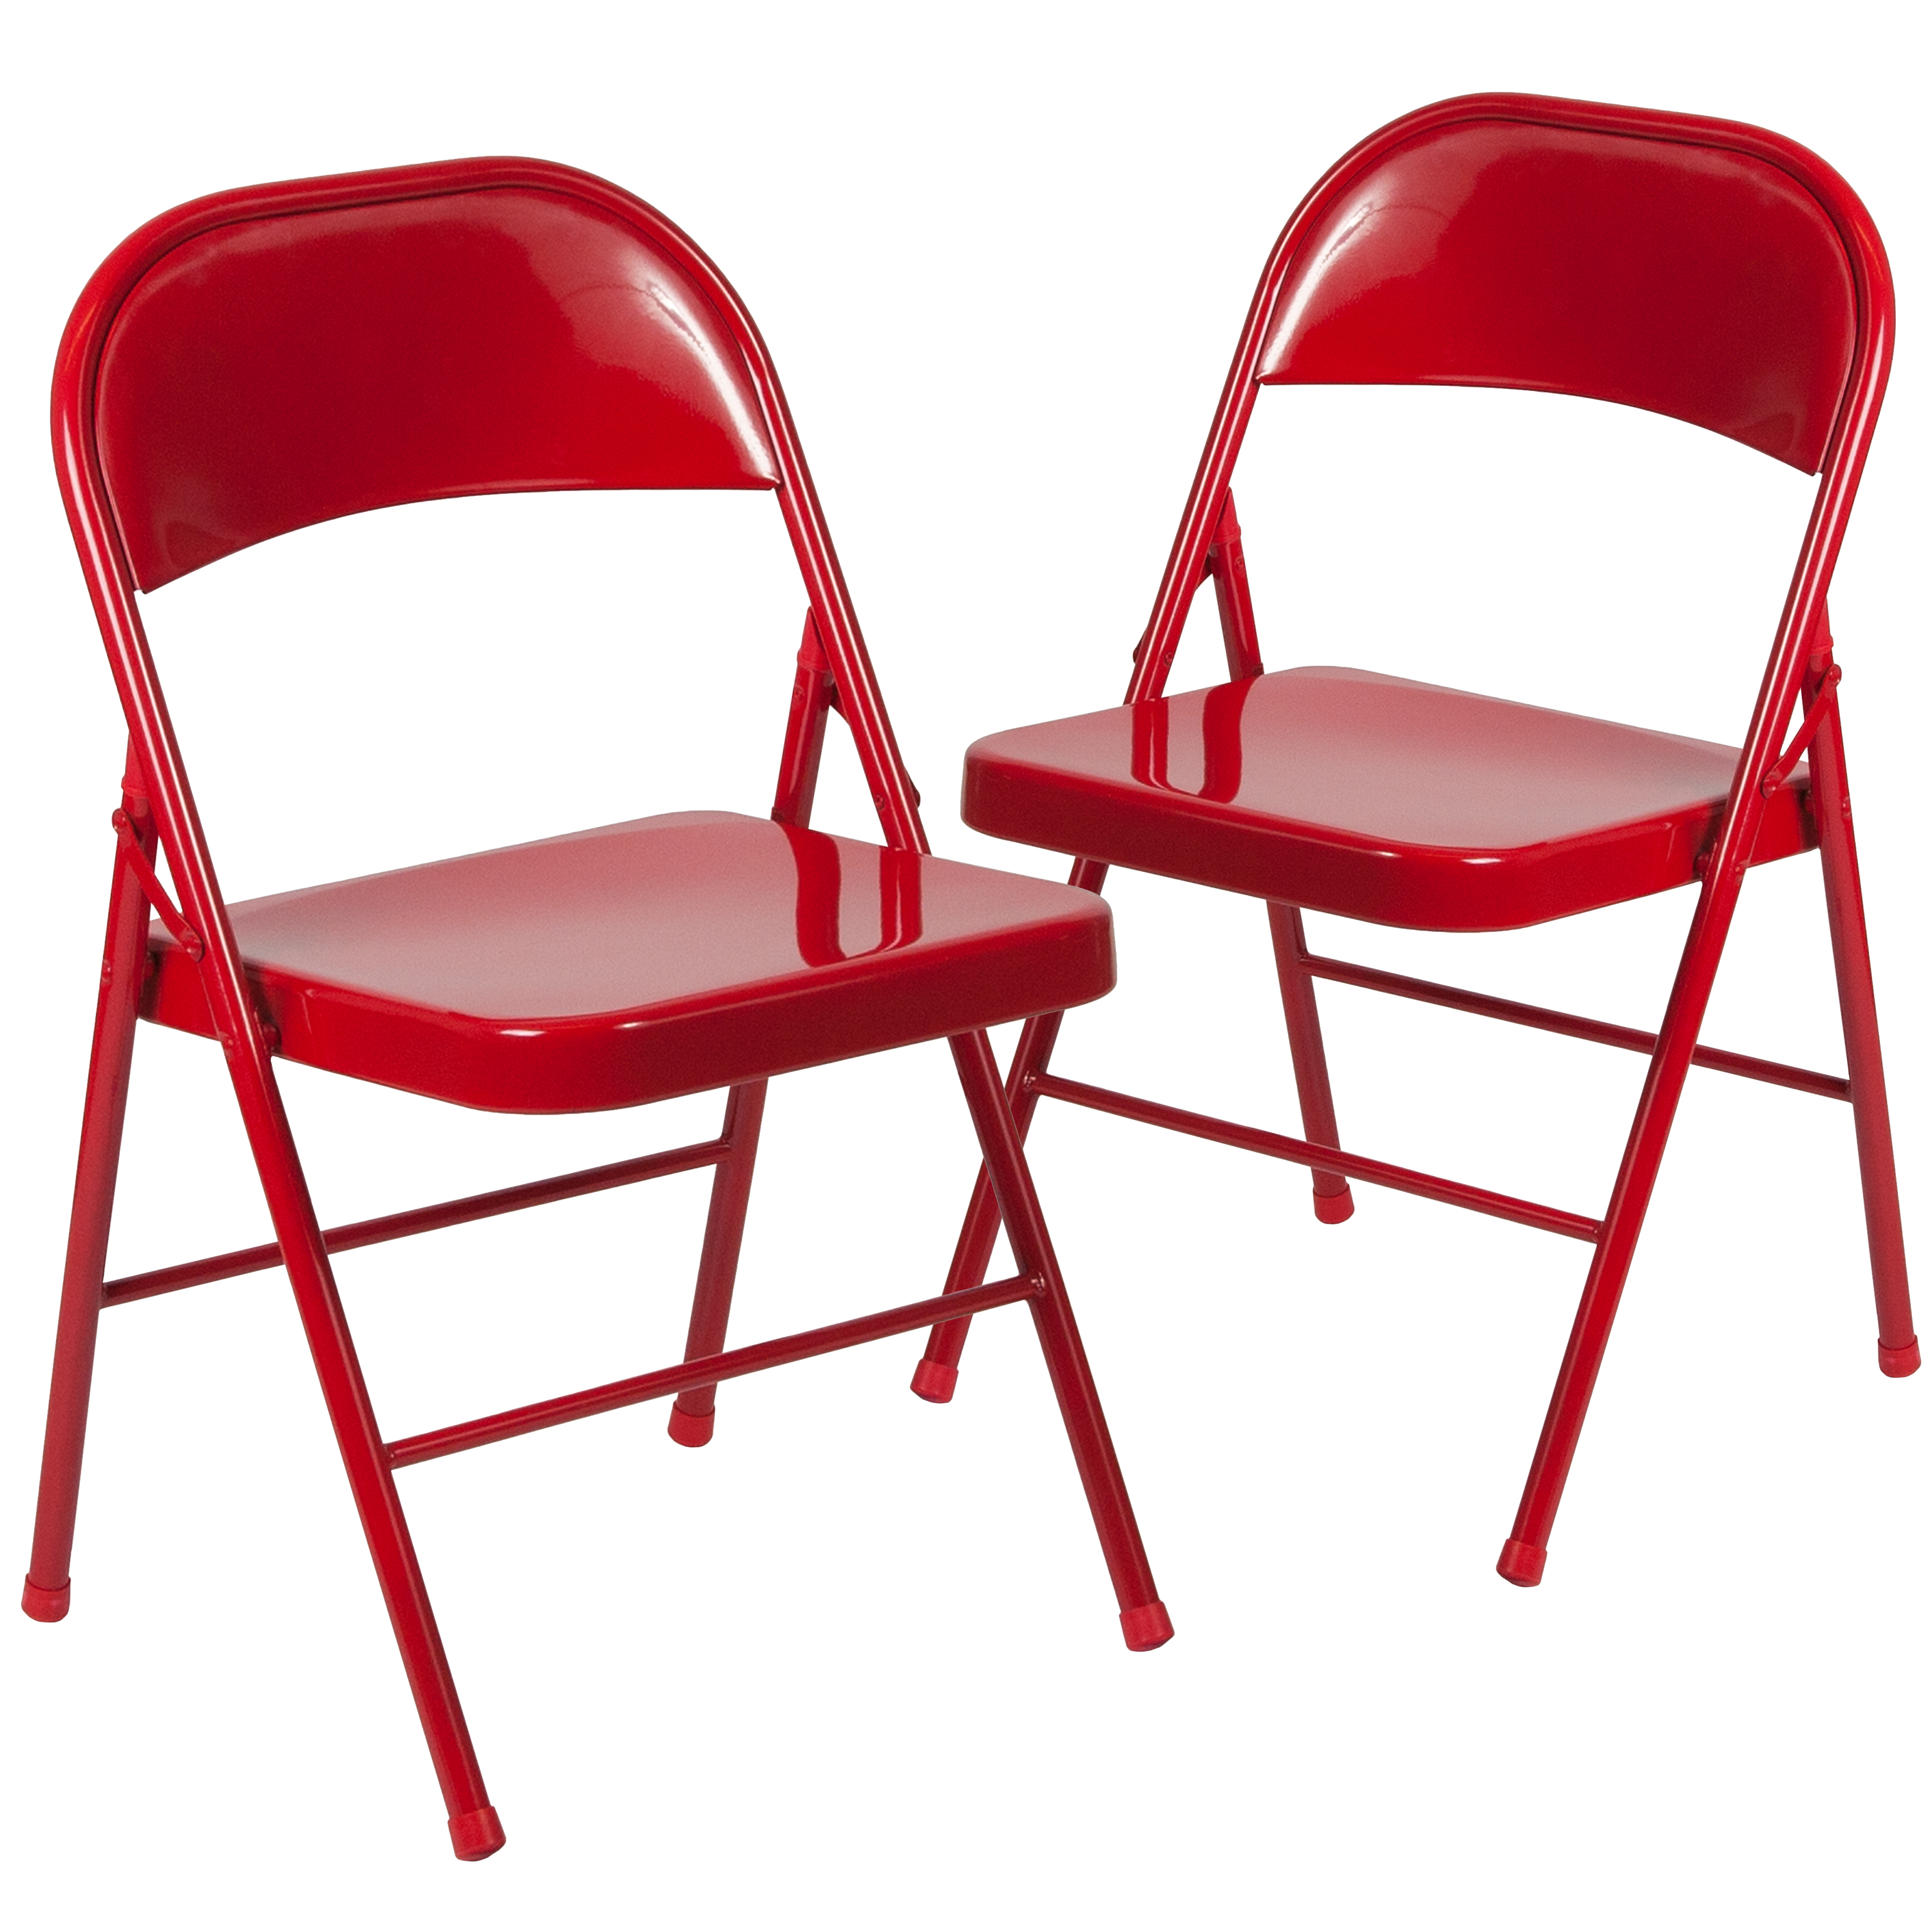 Flash Furniture 2-BD-F002-RED-GG Hercules Double Braced Red Metal Folding Chair, 2 Pack